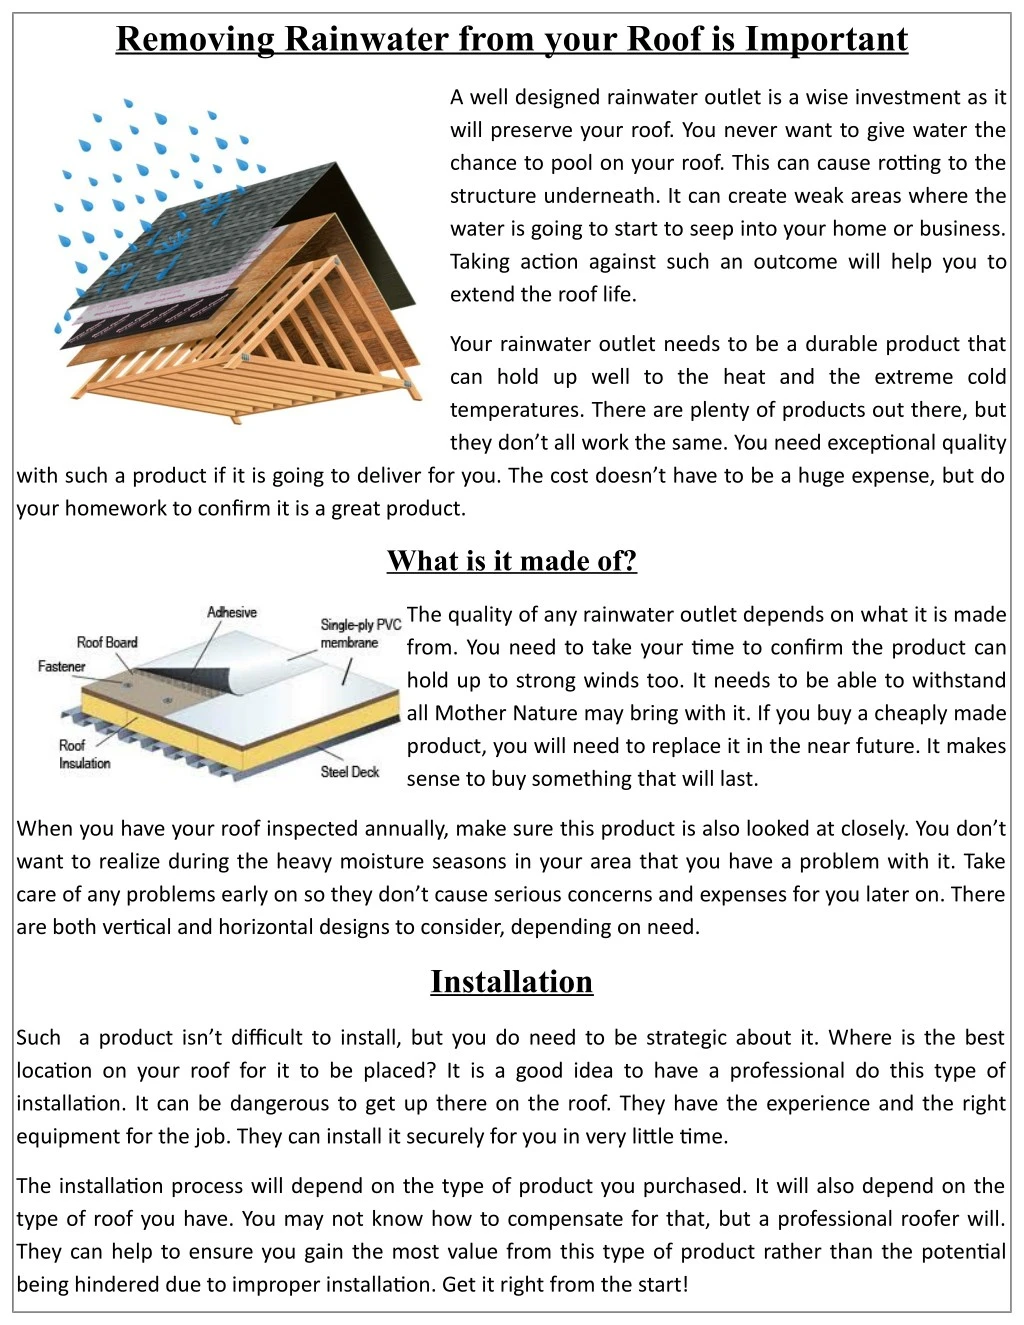 removing rainwater from your roof is important